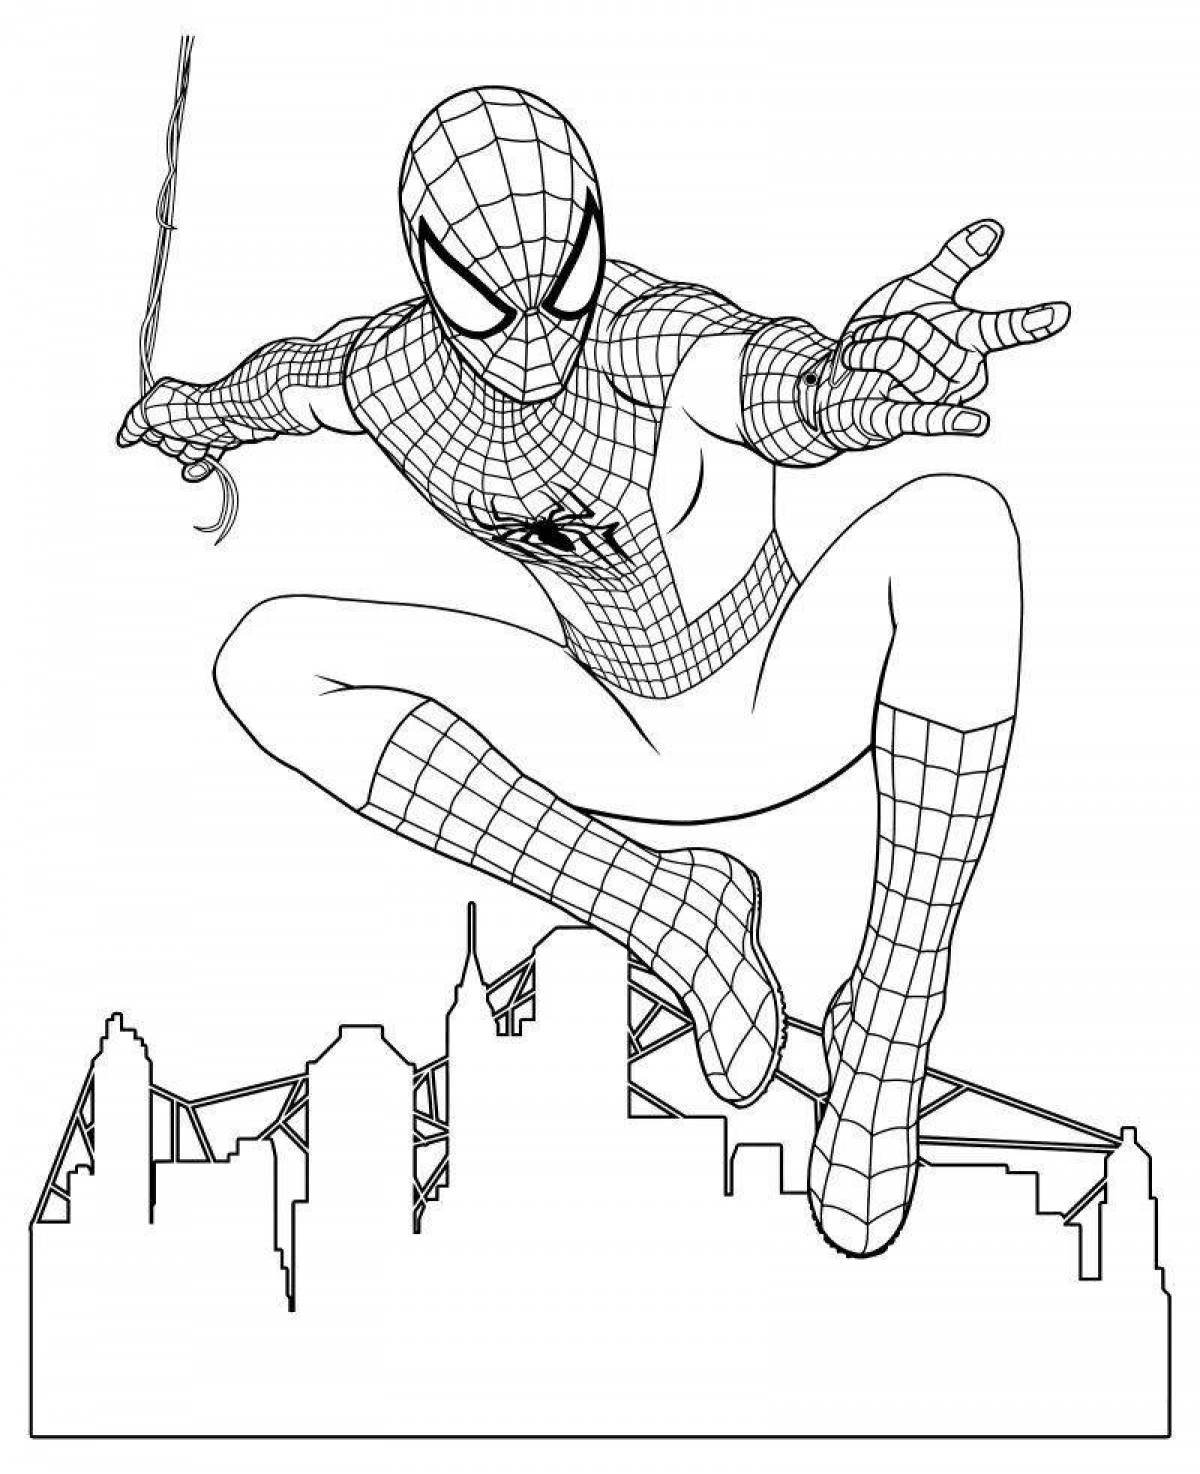 Spiderman live coloring game